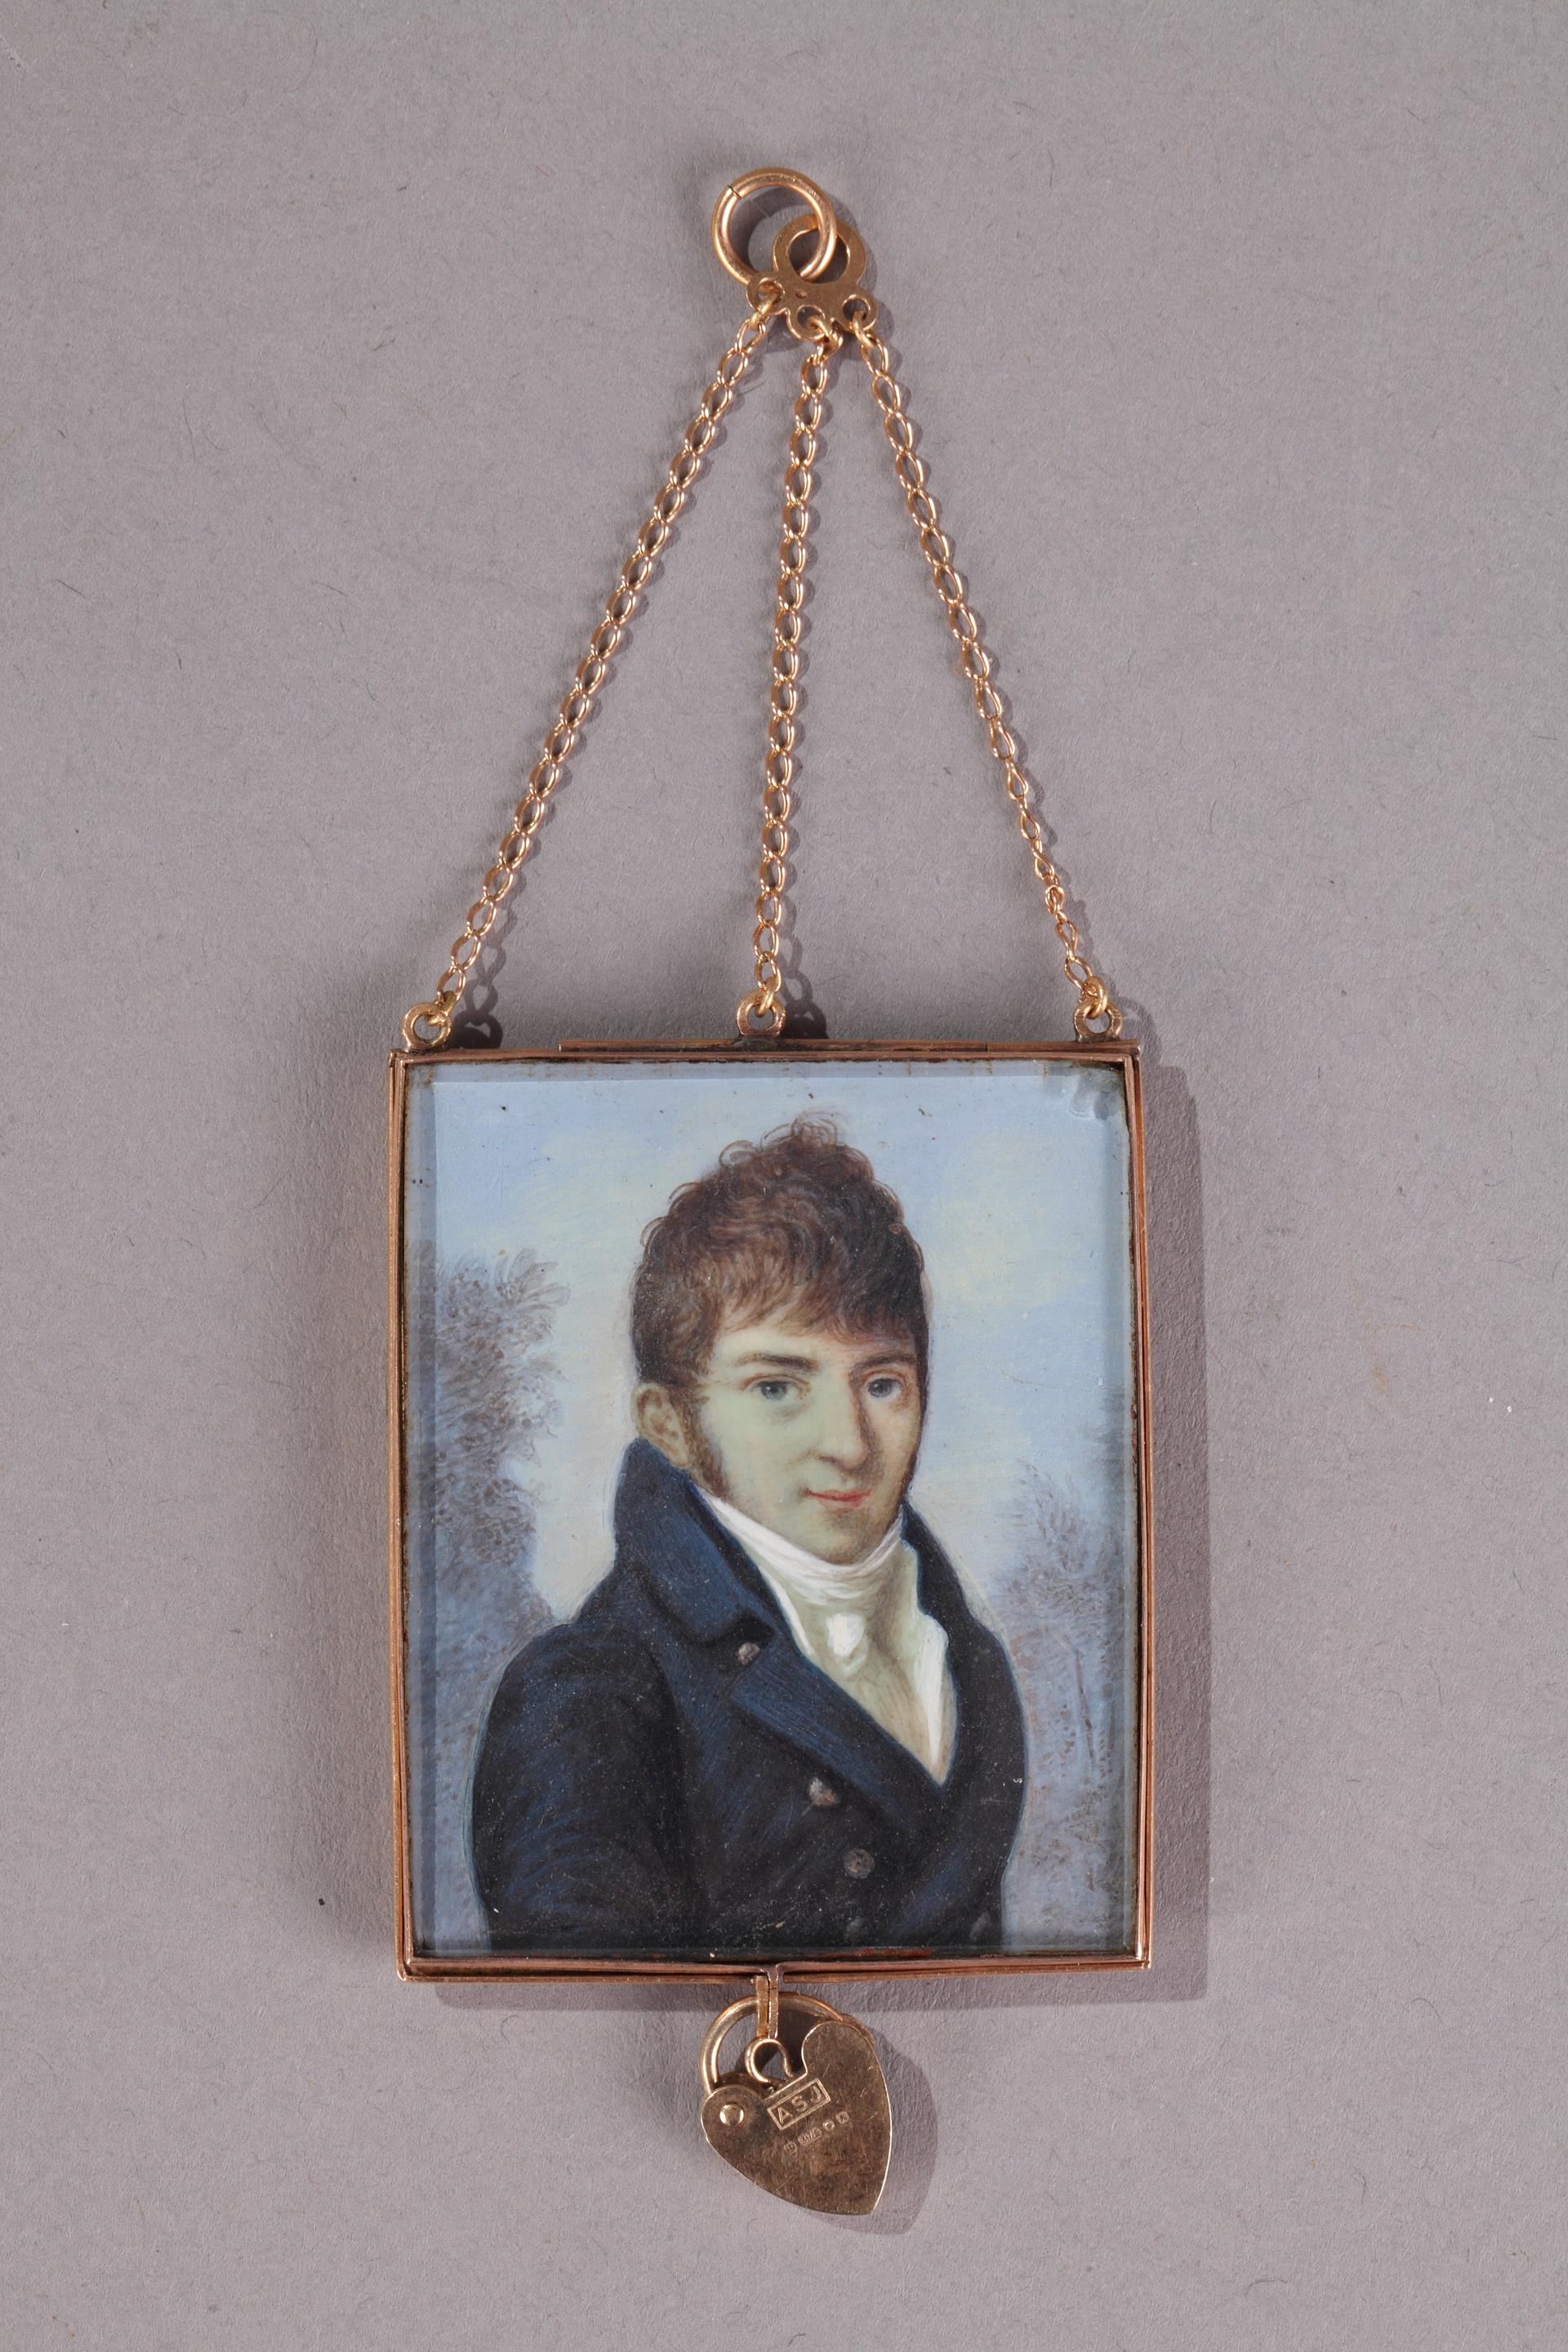 Miniature on ivory, gold and gilded glass.<br/>
EARLY 19TH CENTURY.